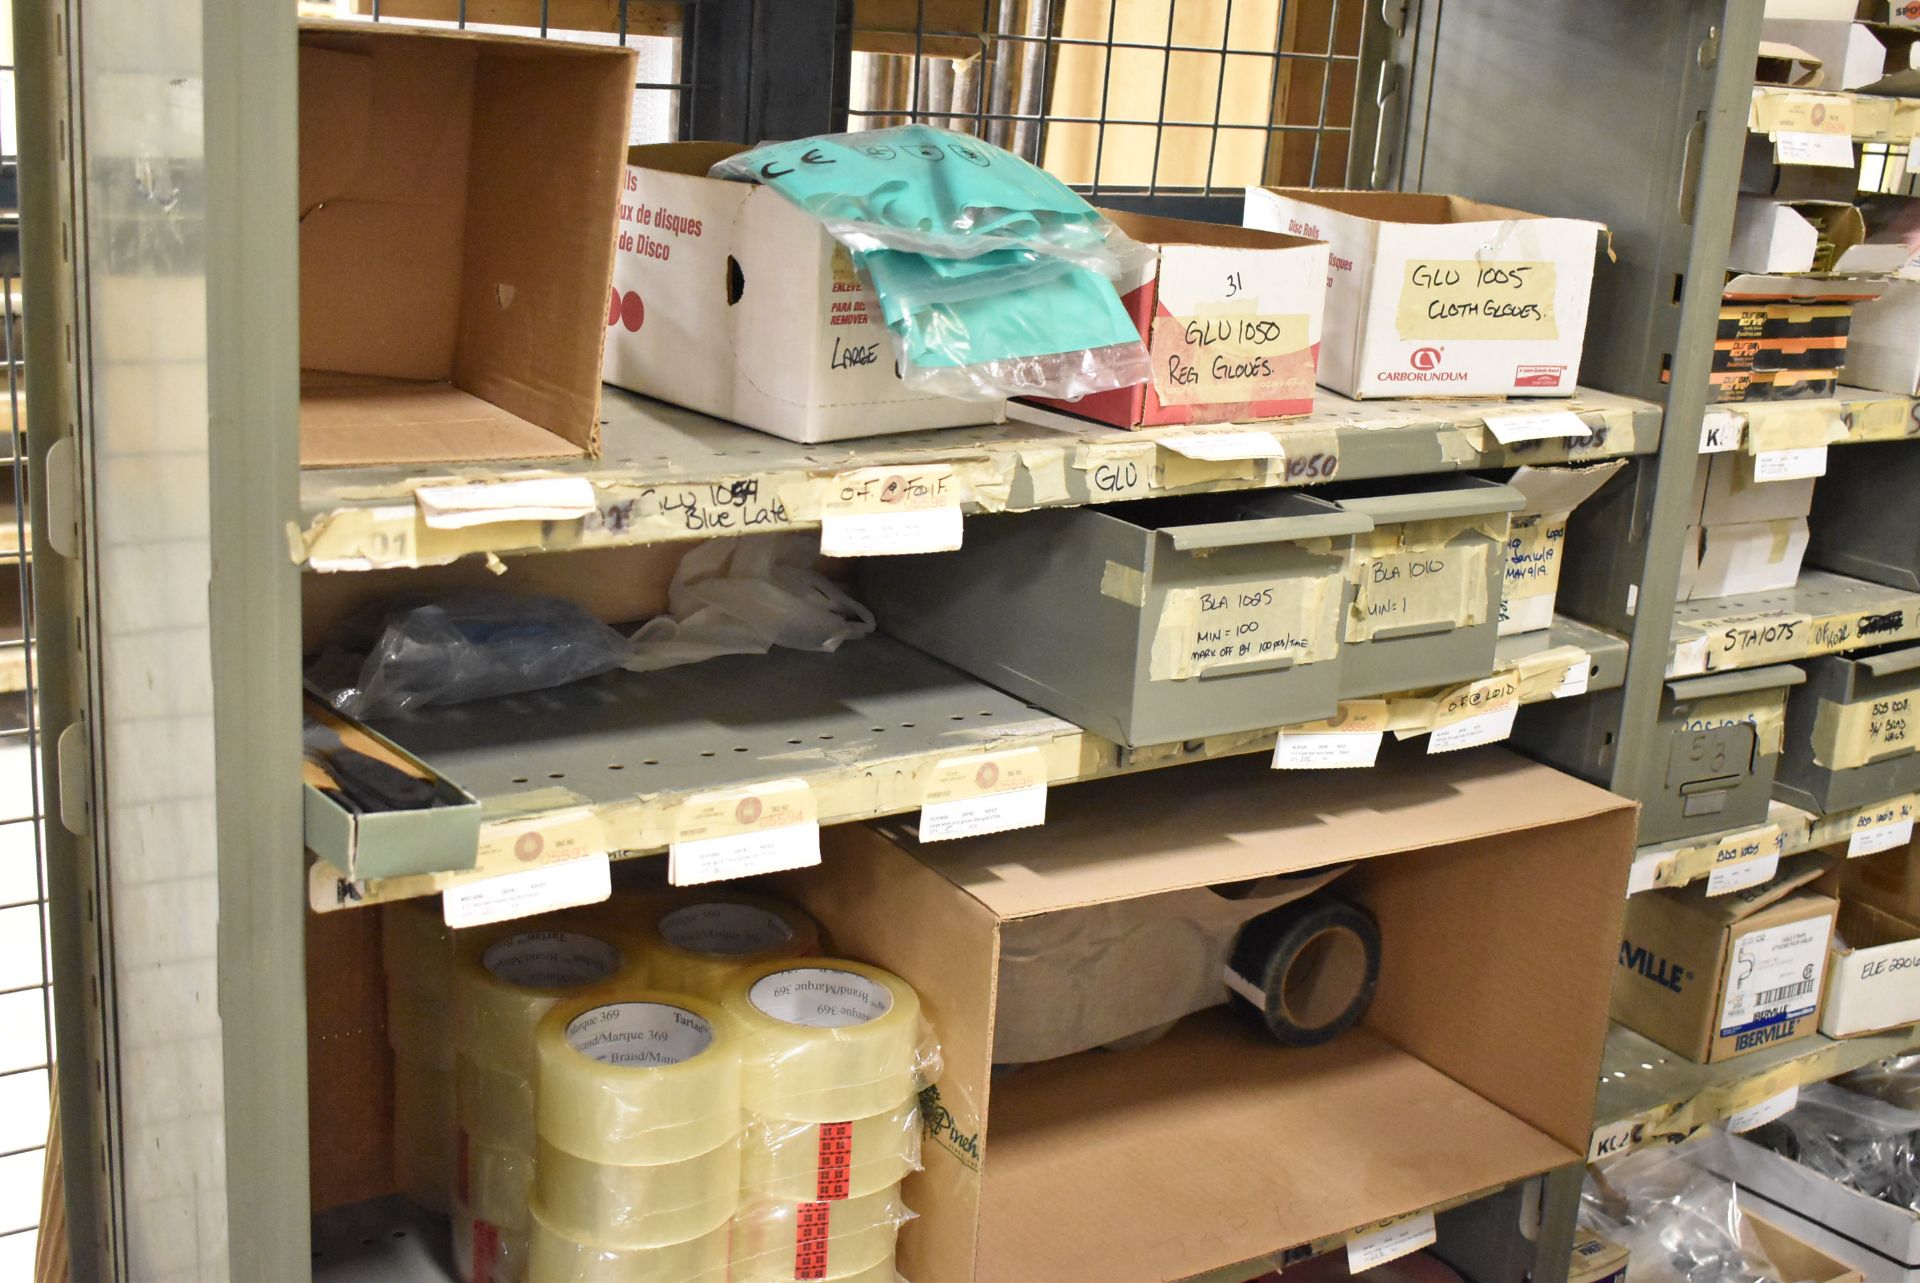 LOT/ CONTENTS OF SHELVES - INCLUDING SHOP SUPPLIES, TAPE, PAINTERS TAPE, CLEANING SUPPLIES, SHIPPING - Image 3 of 4